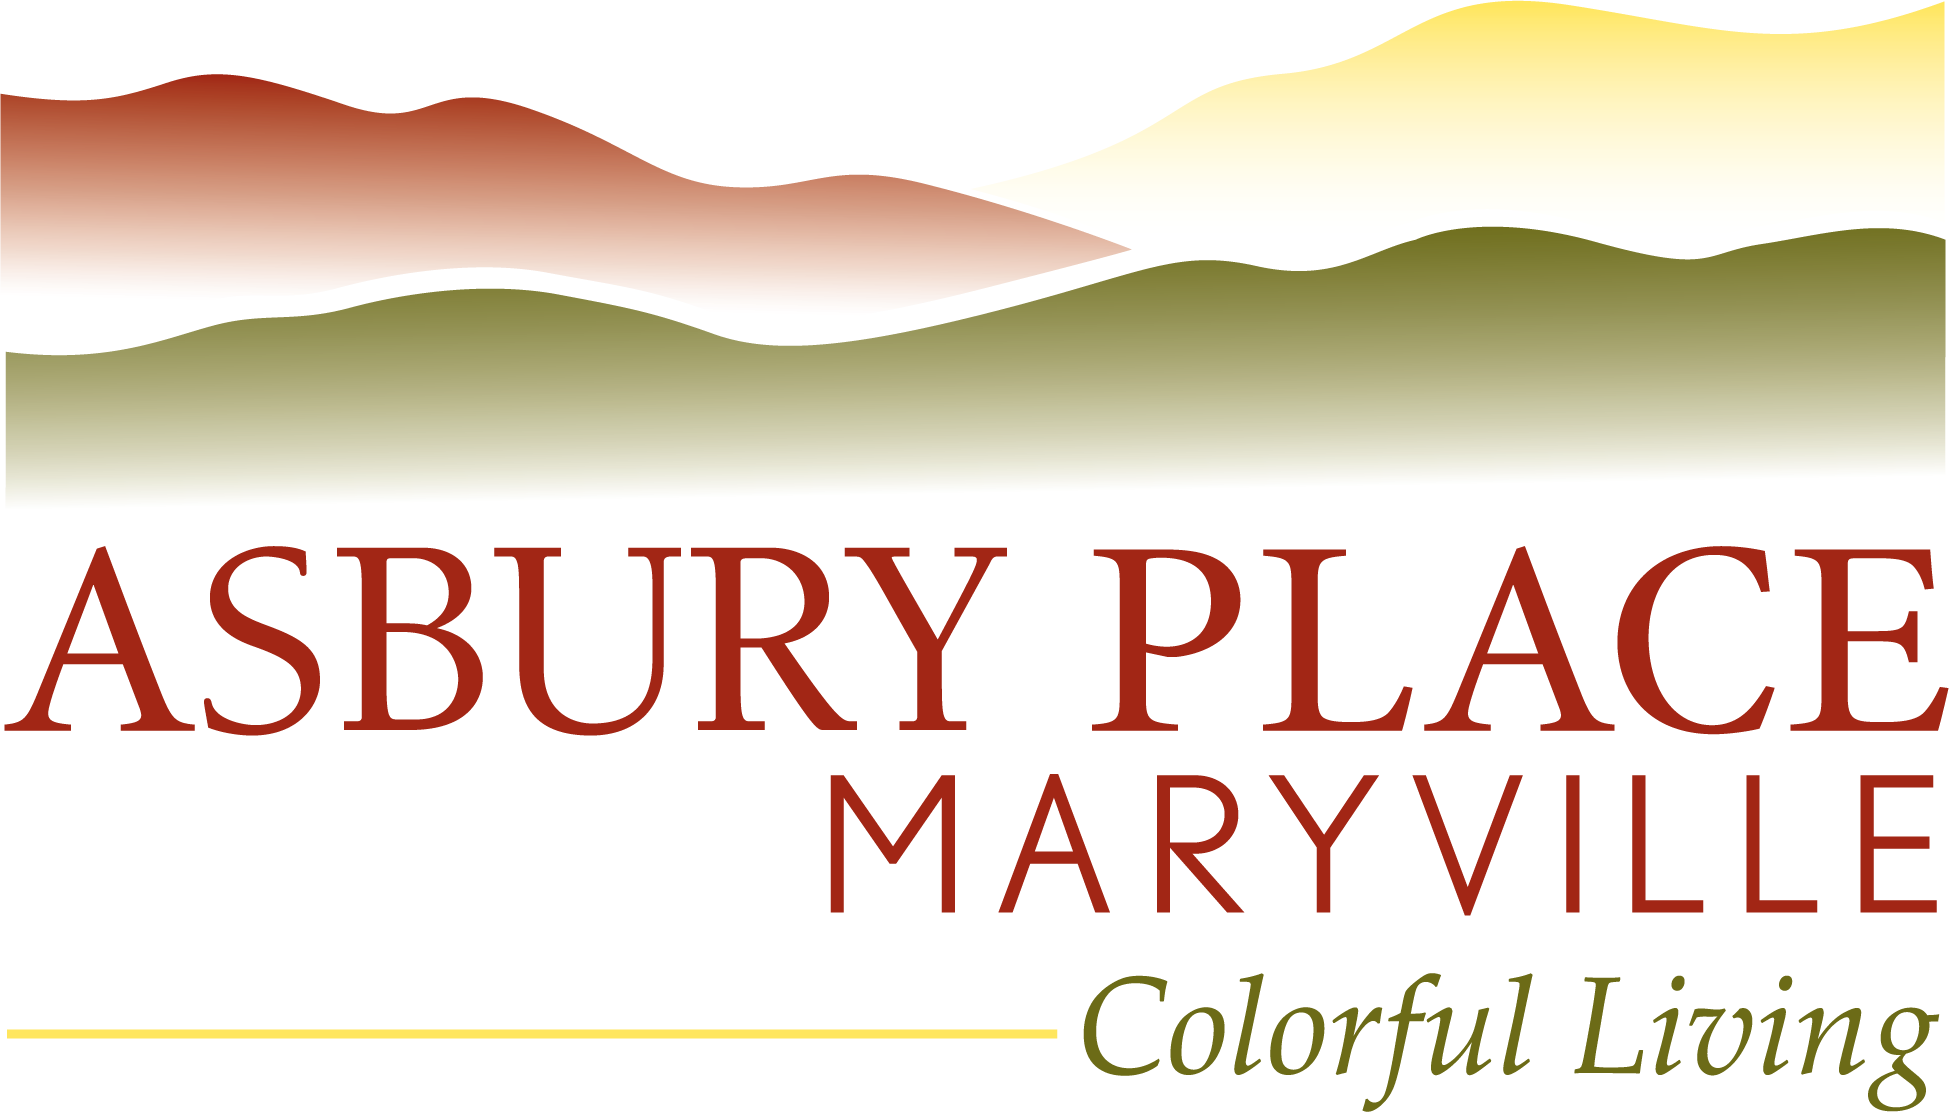 Asbury Place Maryville colorful living logo